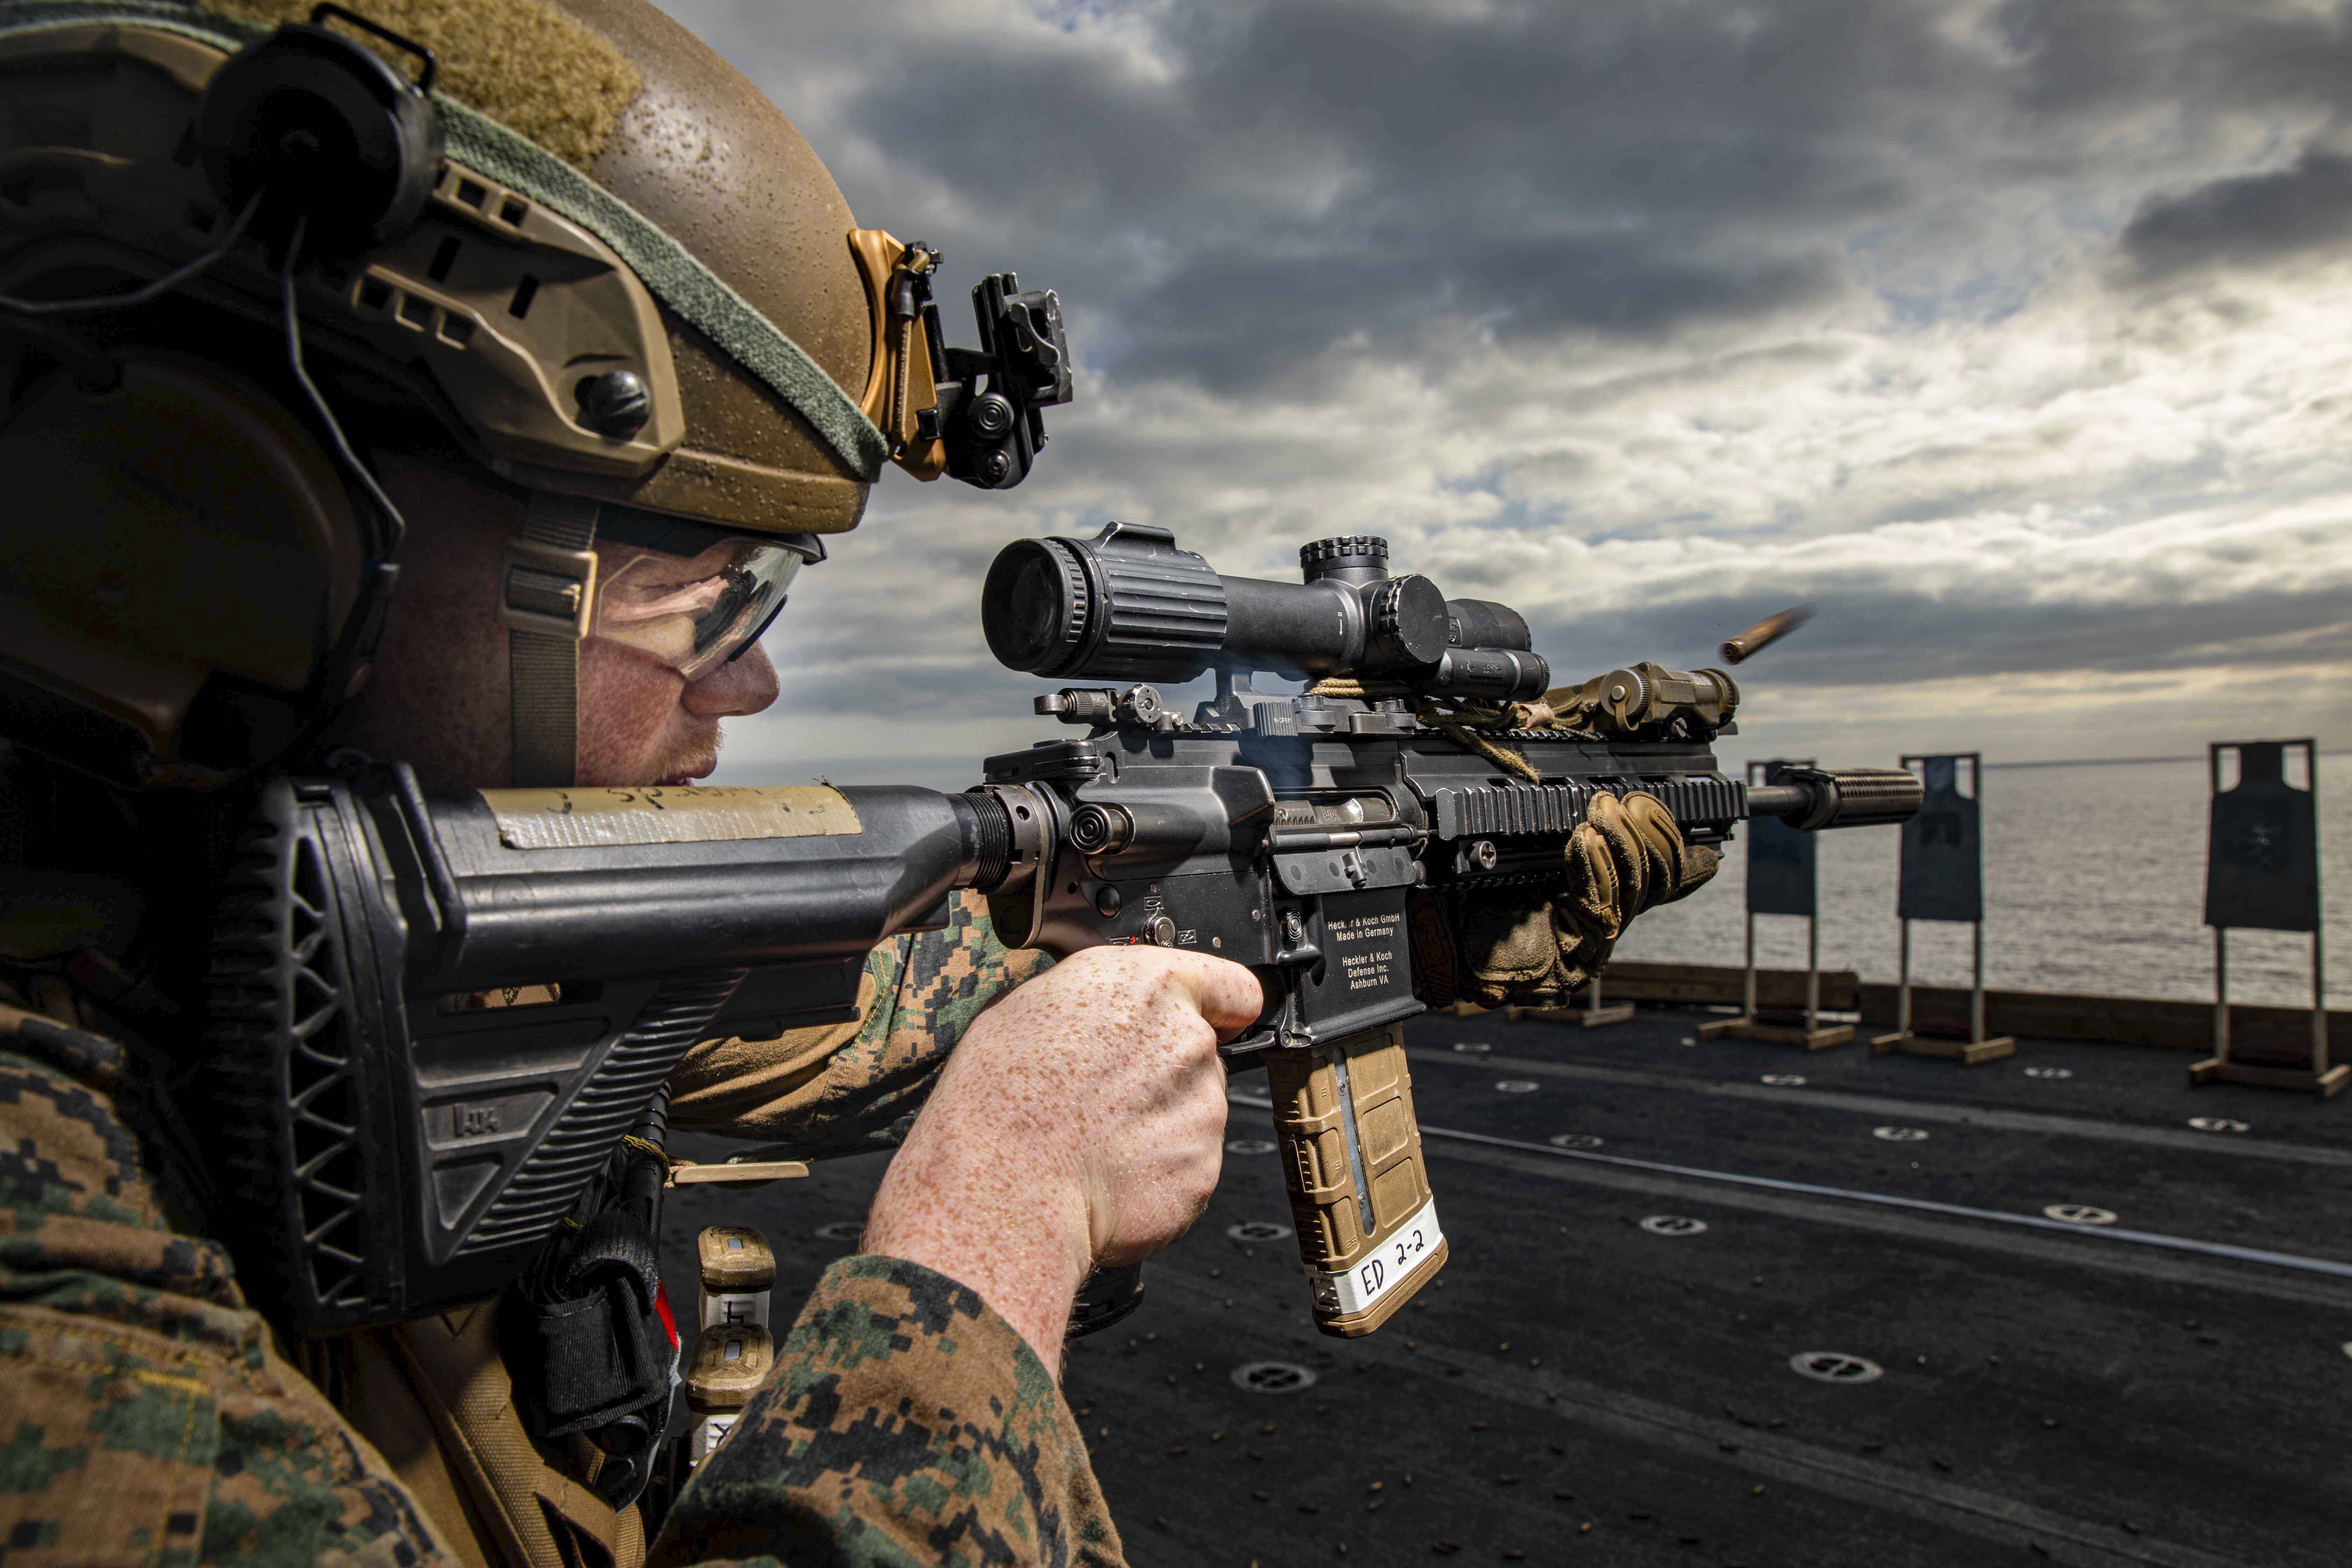 Marine Corps Lance Cpl. Camron Edwards participates in a live-fire range aboard the USS Kearsarge in the Atlantic Ocean, July 15, 2022.